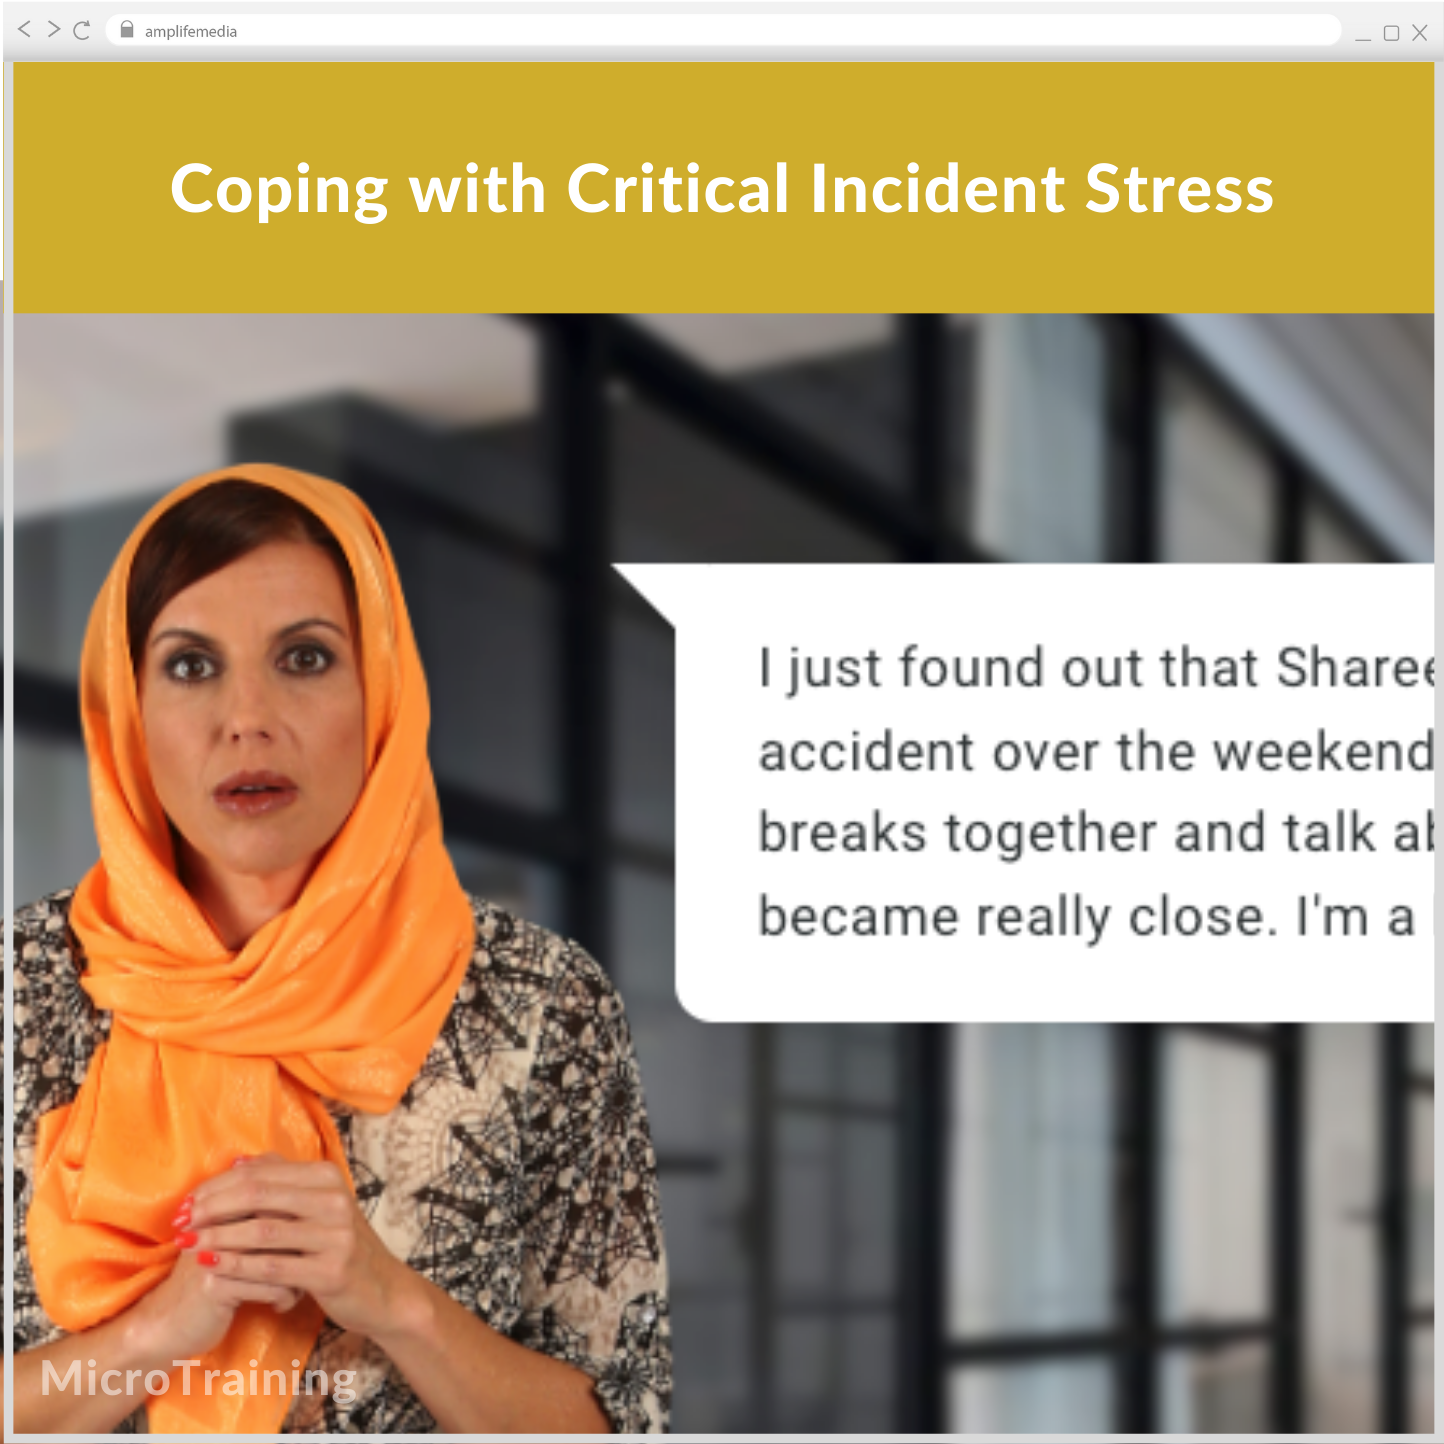 Subscription to Wellbeing Media: Coping with Critical Incident Stress MT 522